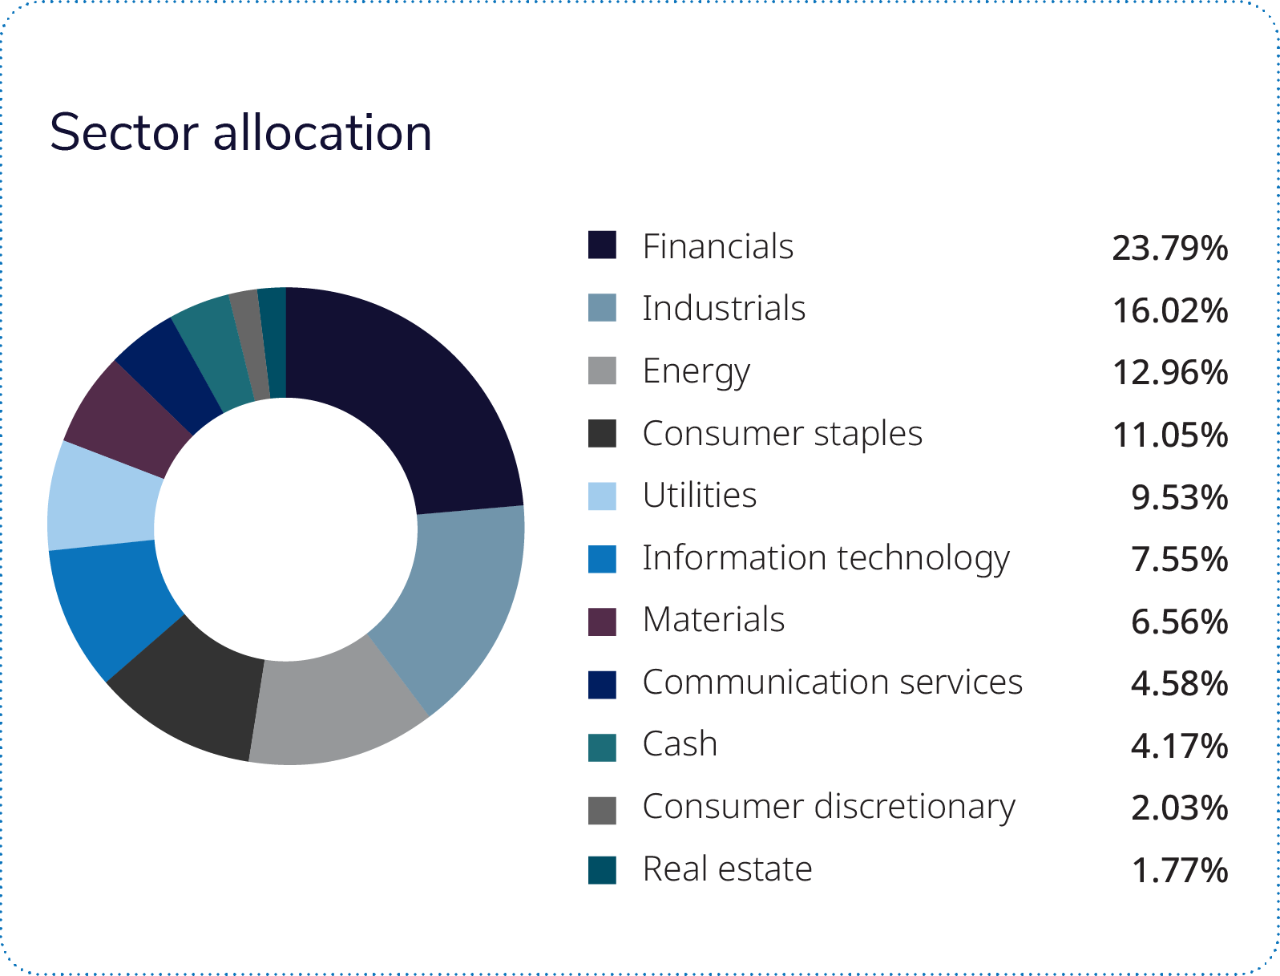 Almost two-thirds of the fund is comprised of four sectors: financials, industrials, energy and consumer staples. 